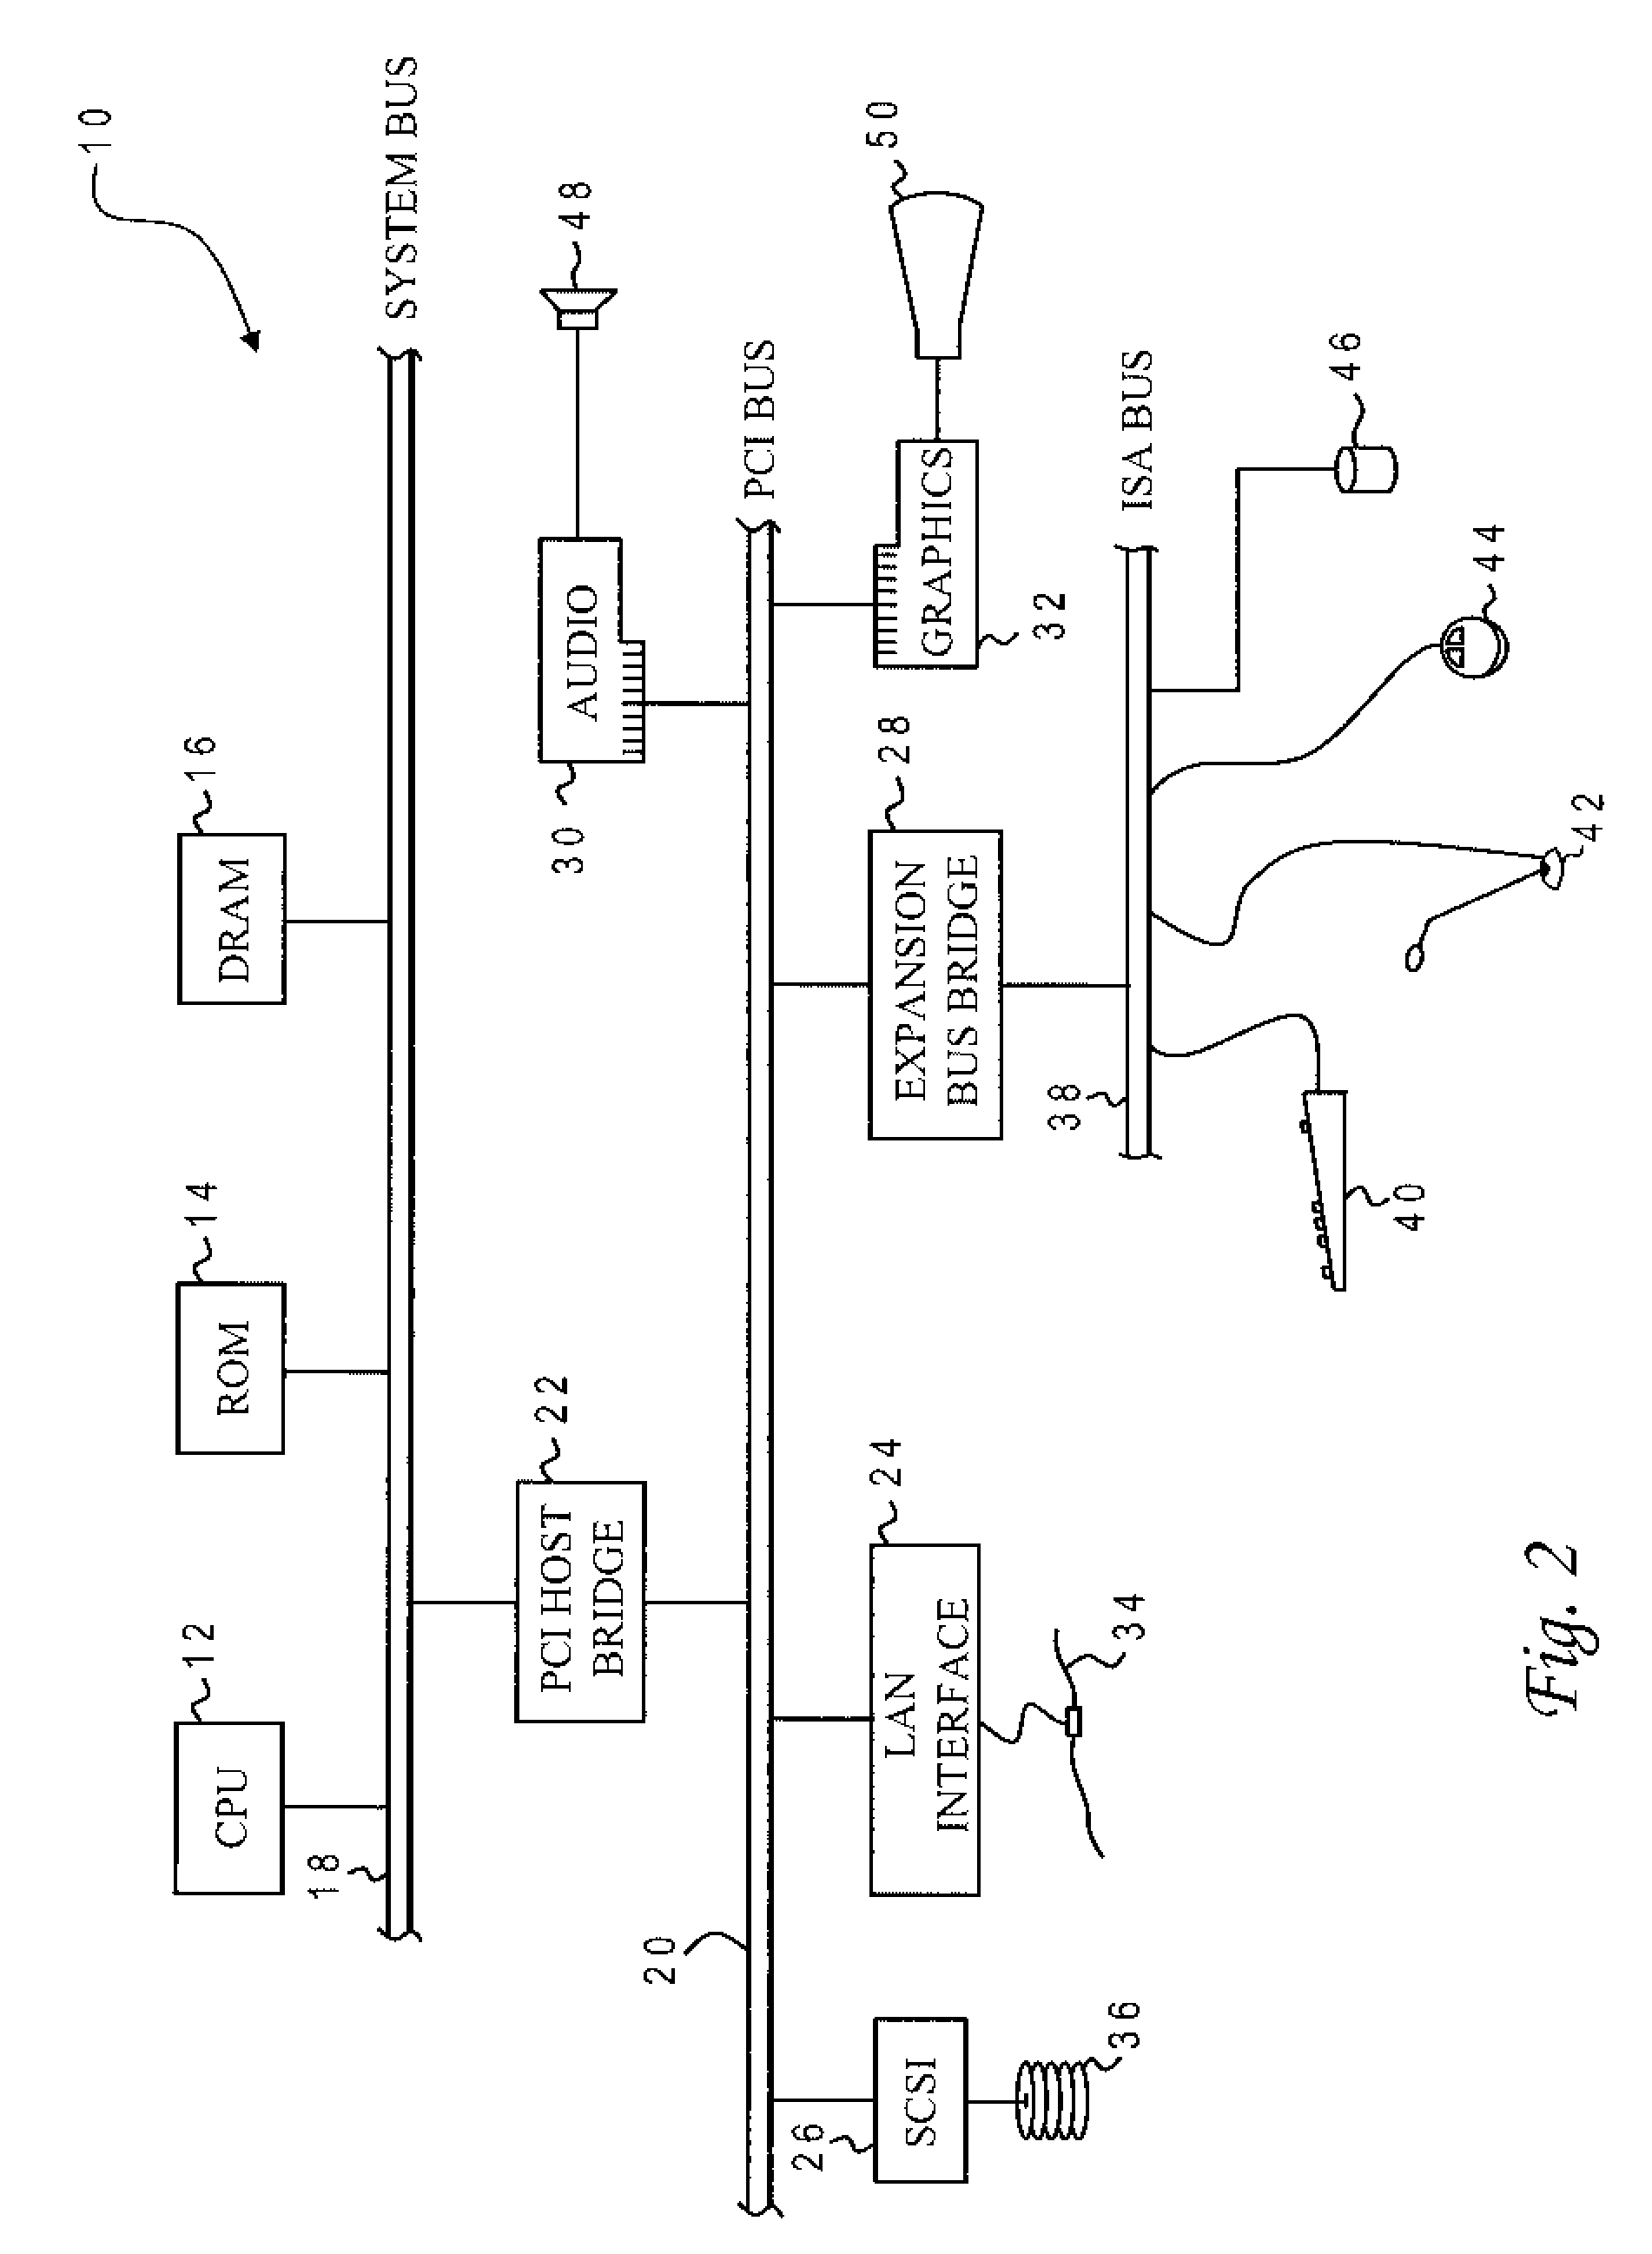 Method for Soft Error Modeling with Double Current Pulse